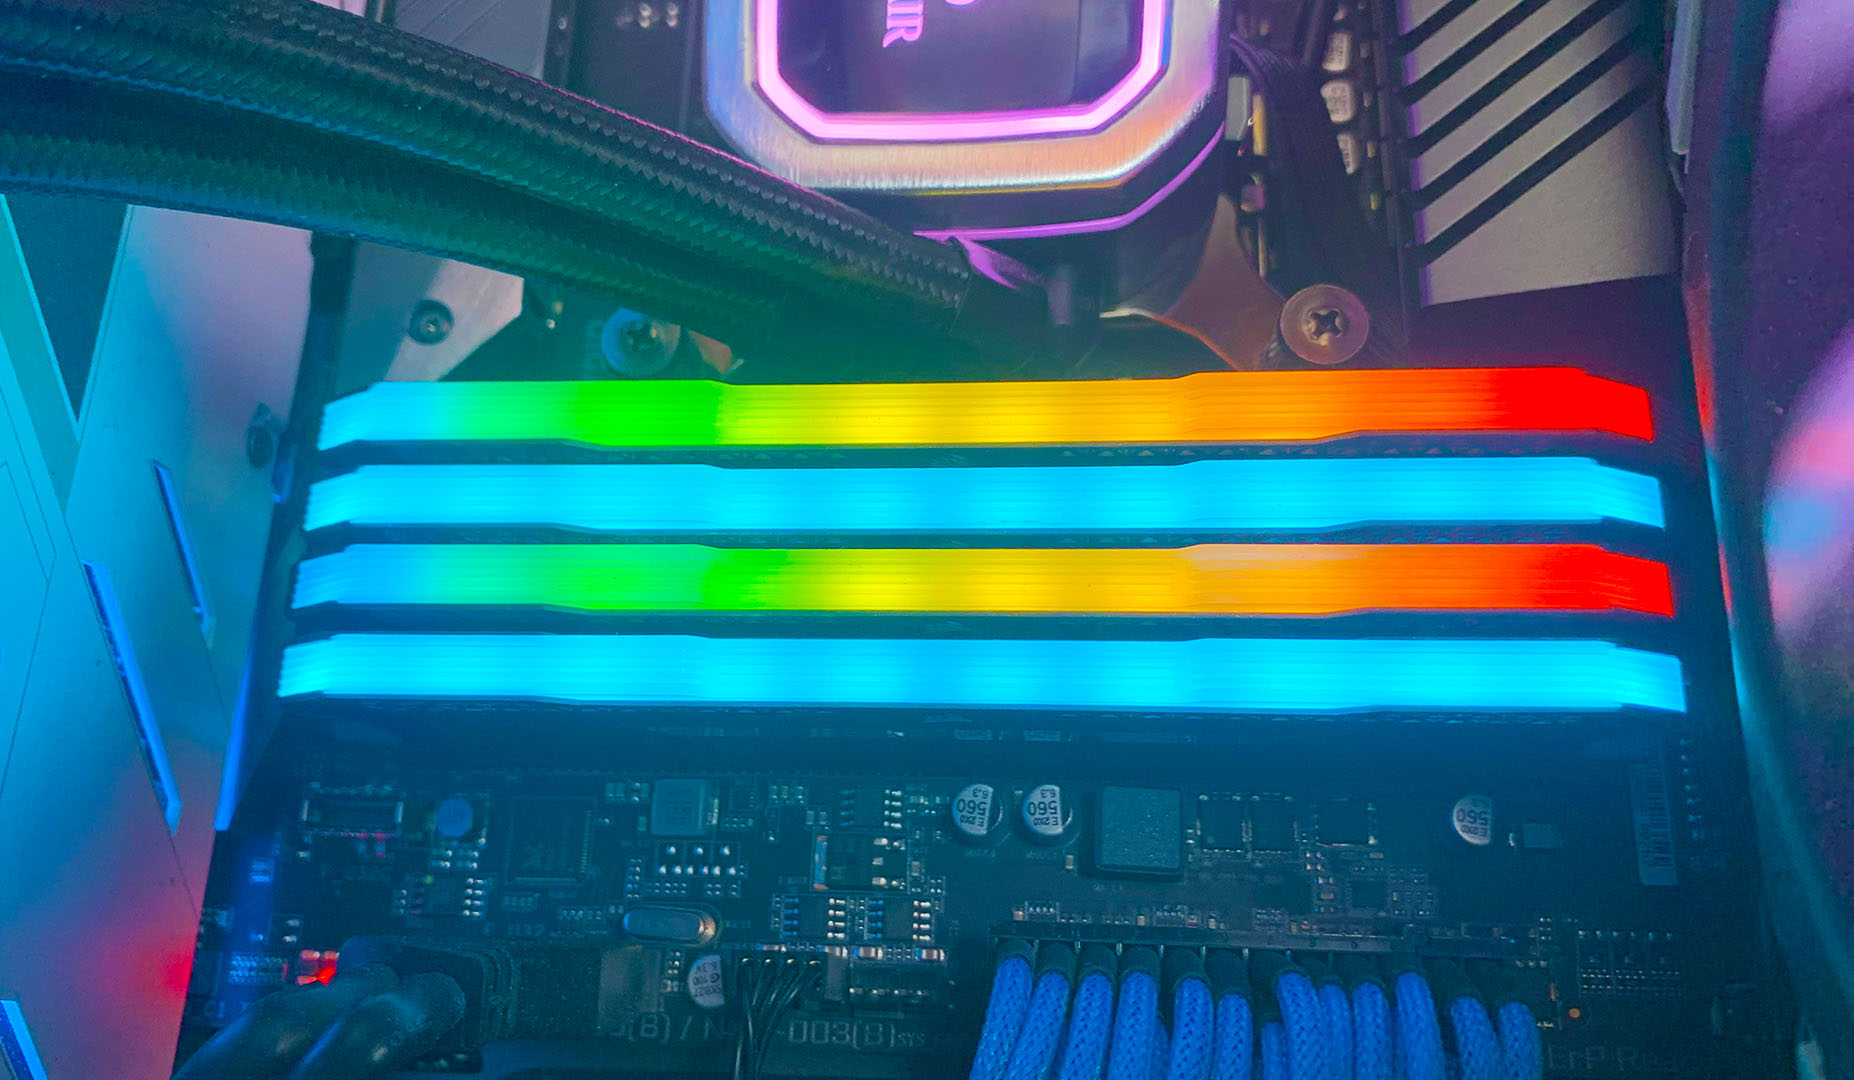 Your RGB lighting could be damaging your graphics card